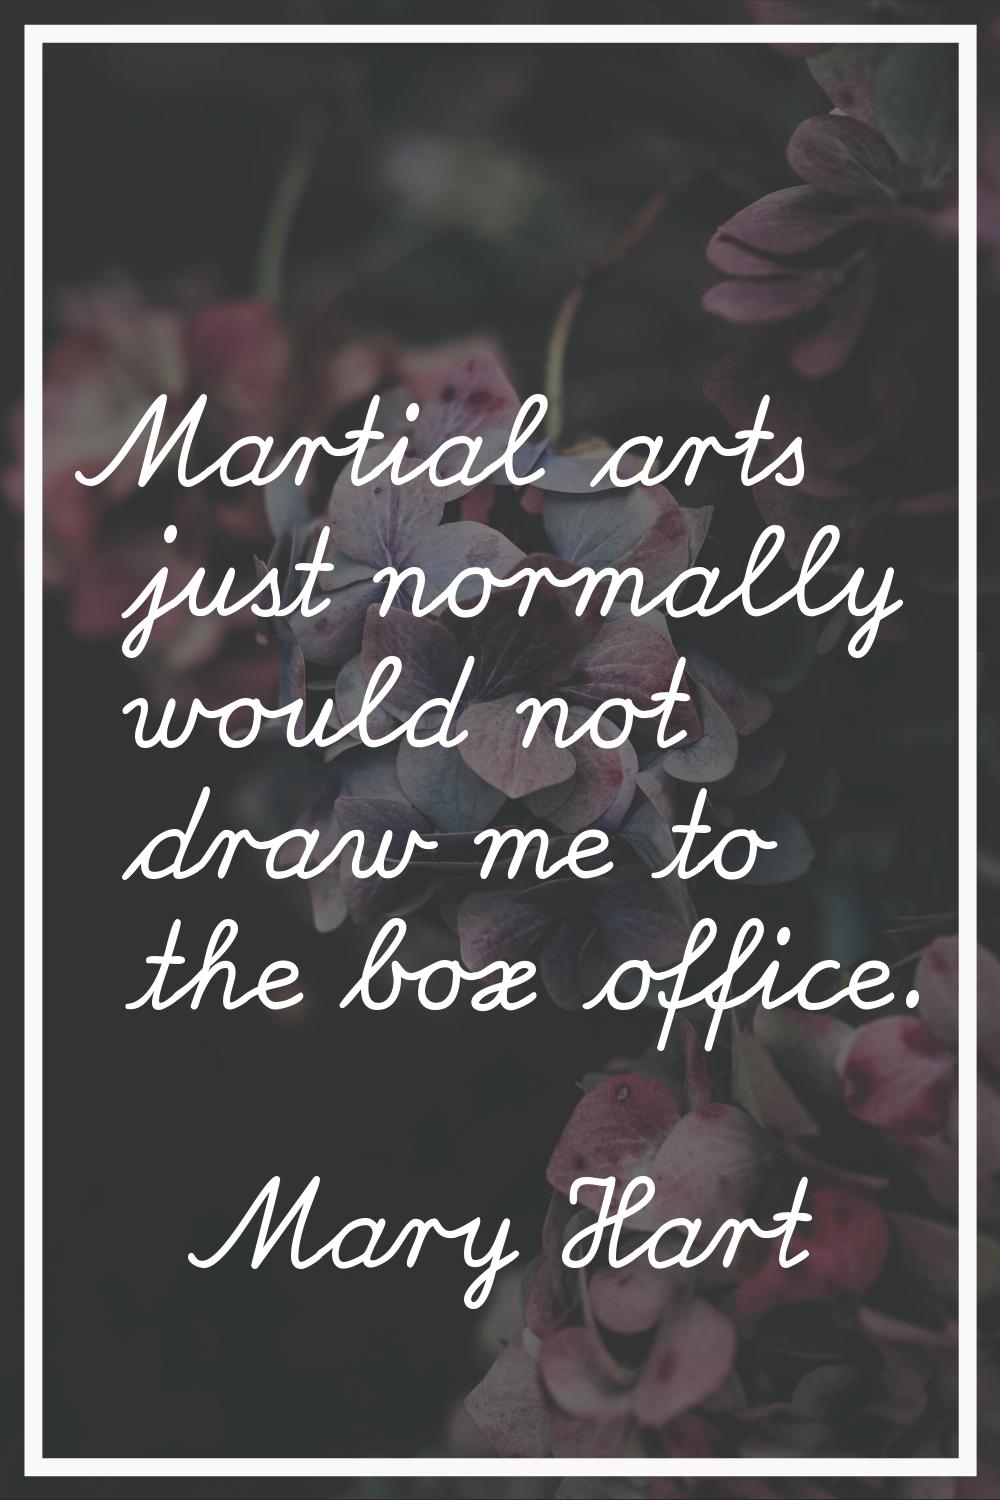 Martial arts just normally would not draw me to the box office.